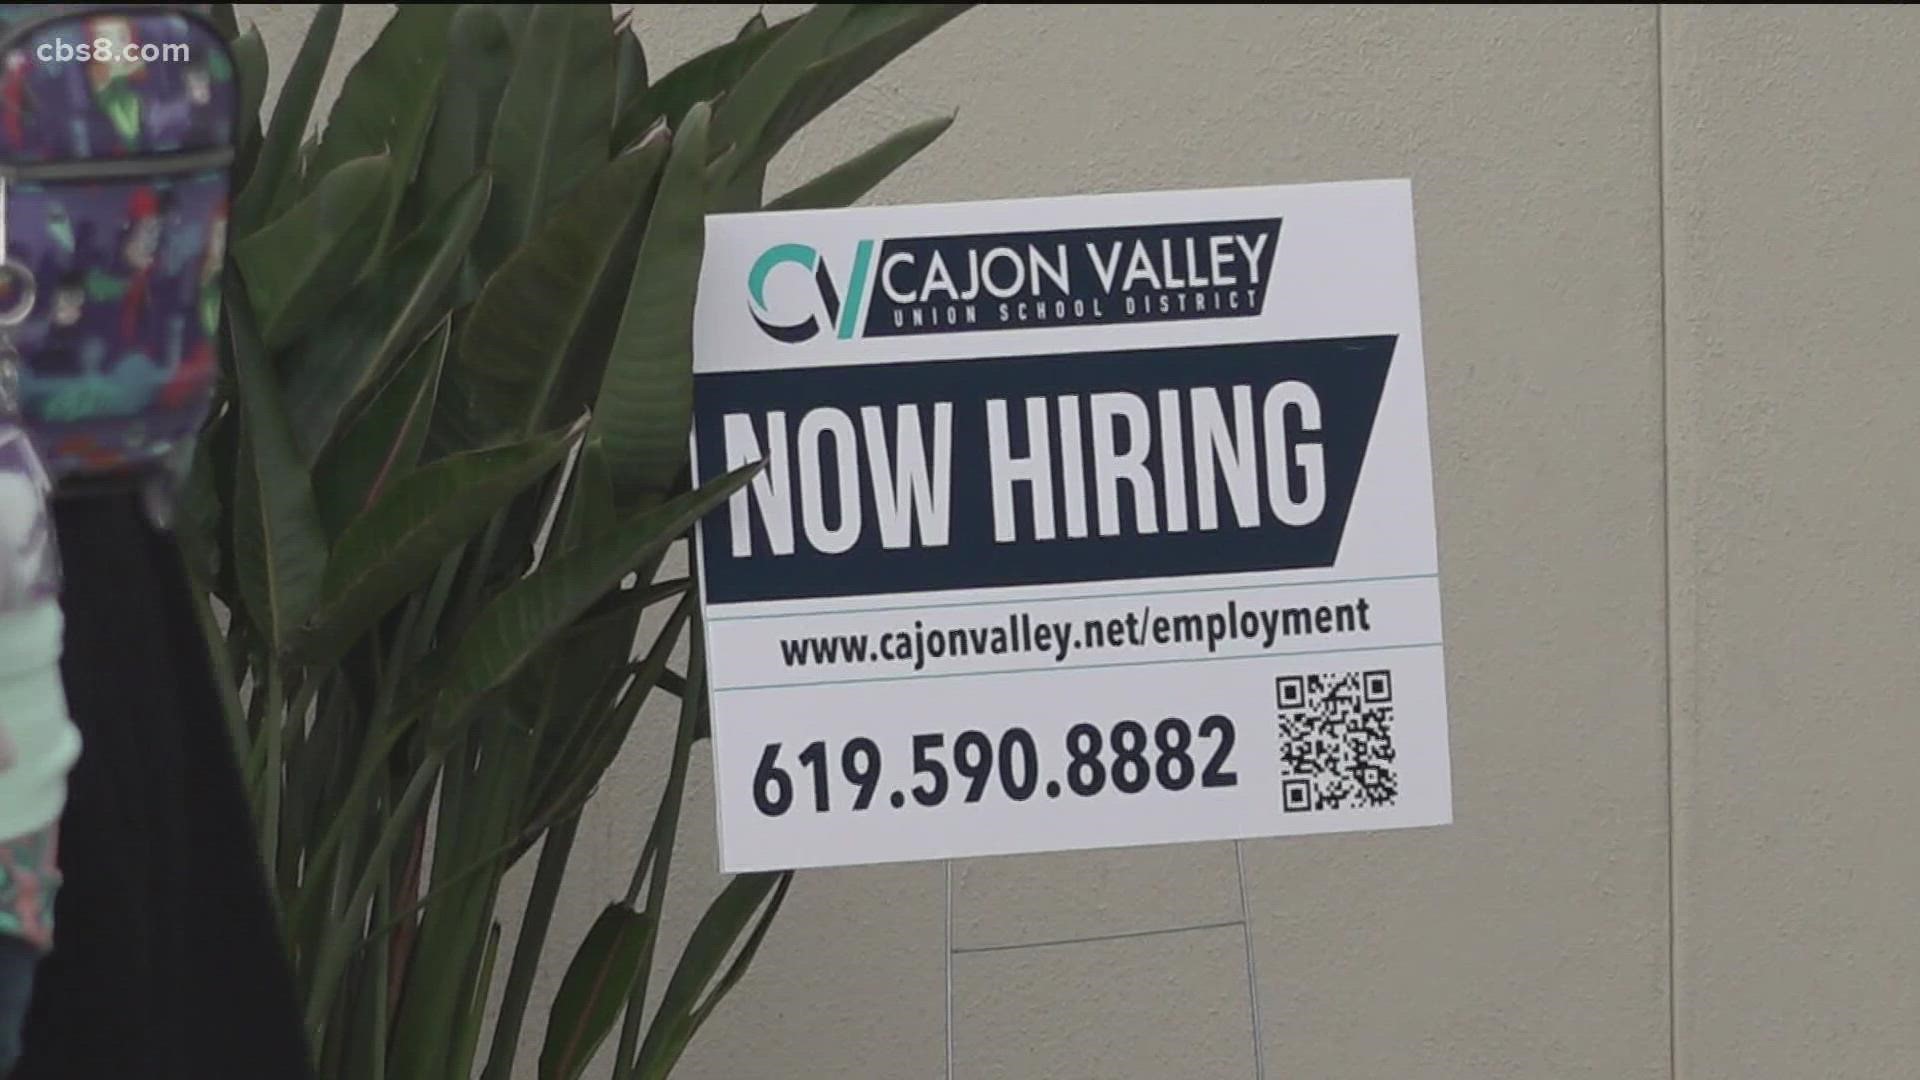 Organizers say there are more than 600 job positions open and about 750 job hunters pre-registered for the San Diego Unified School District job fair on Saturday.